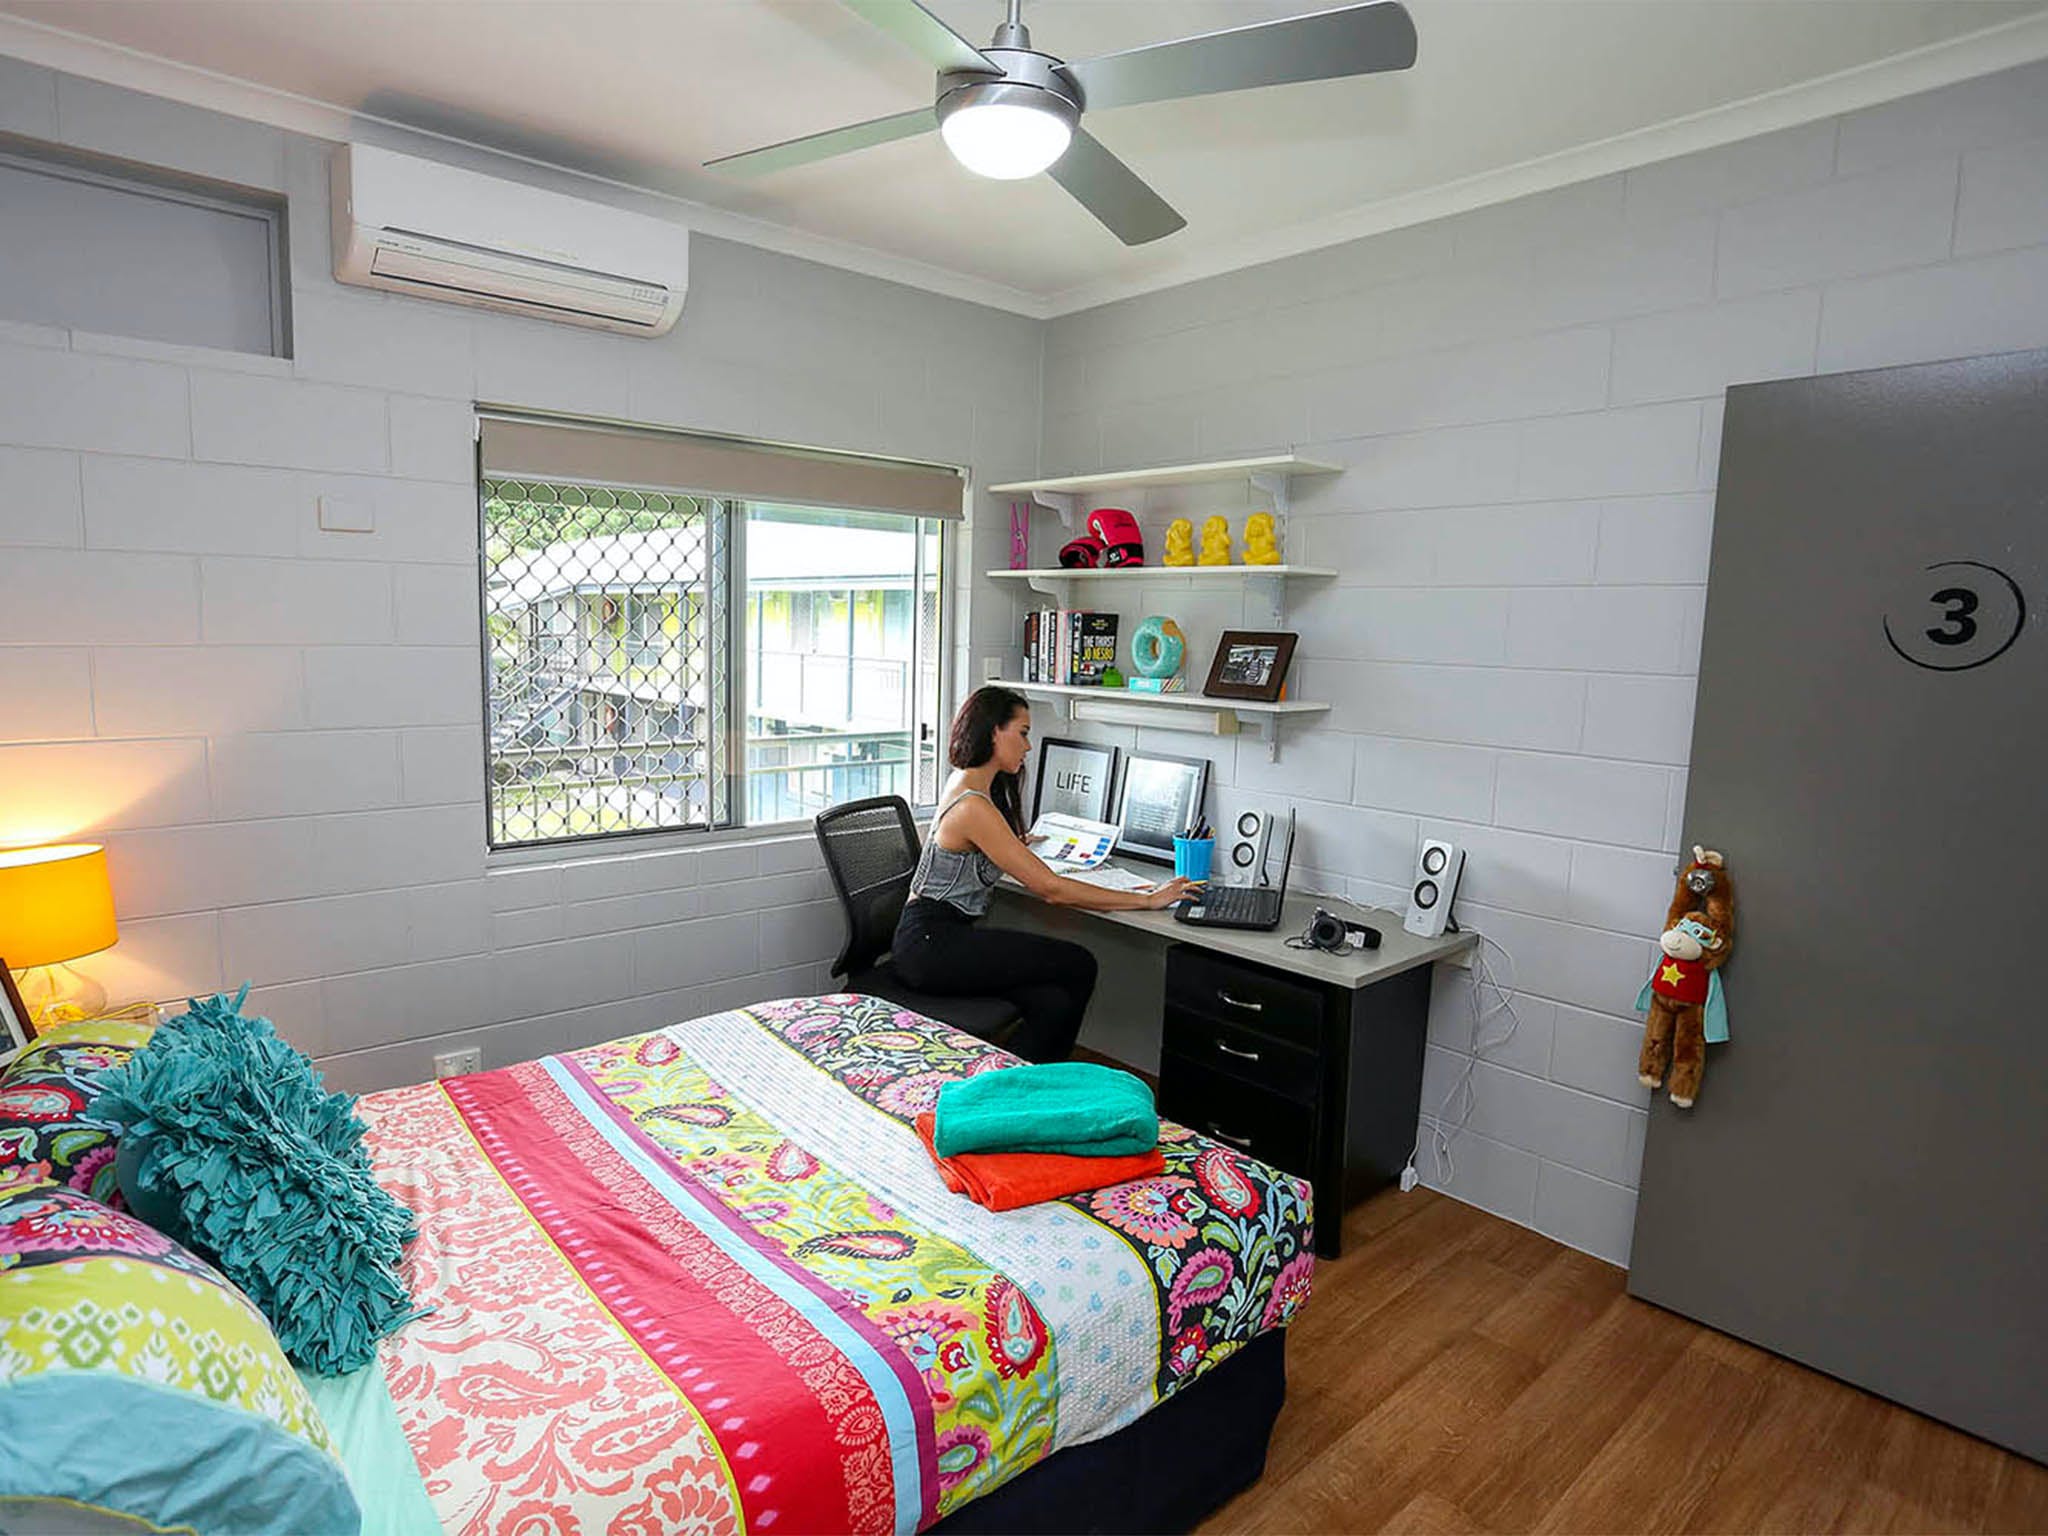 Cairns Student Lodge - Dalby Accommodation